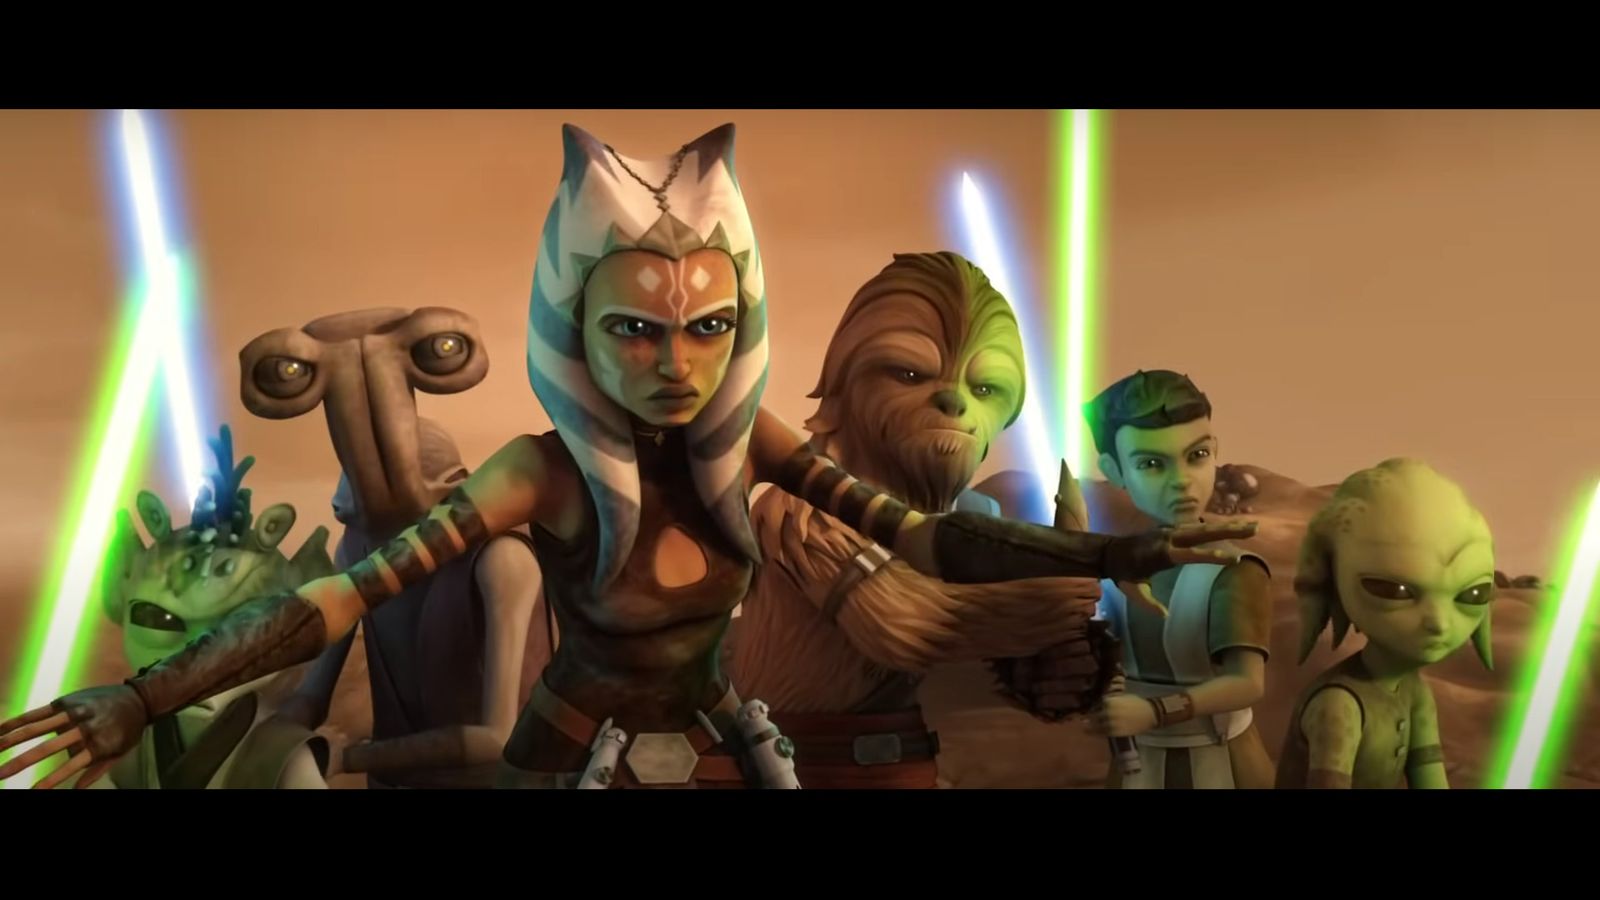 Ahsoka Tano protecting the other young jedis in The Clone Wars